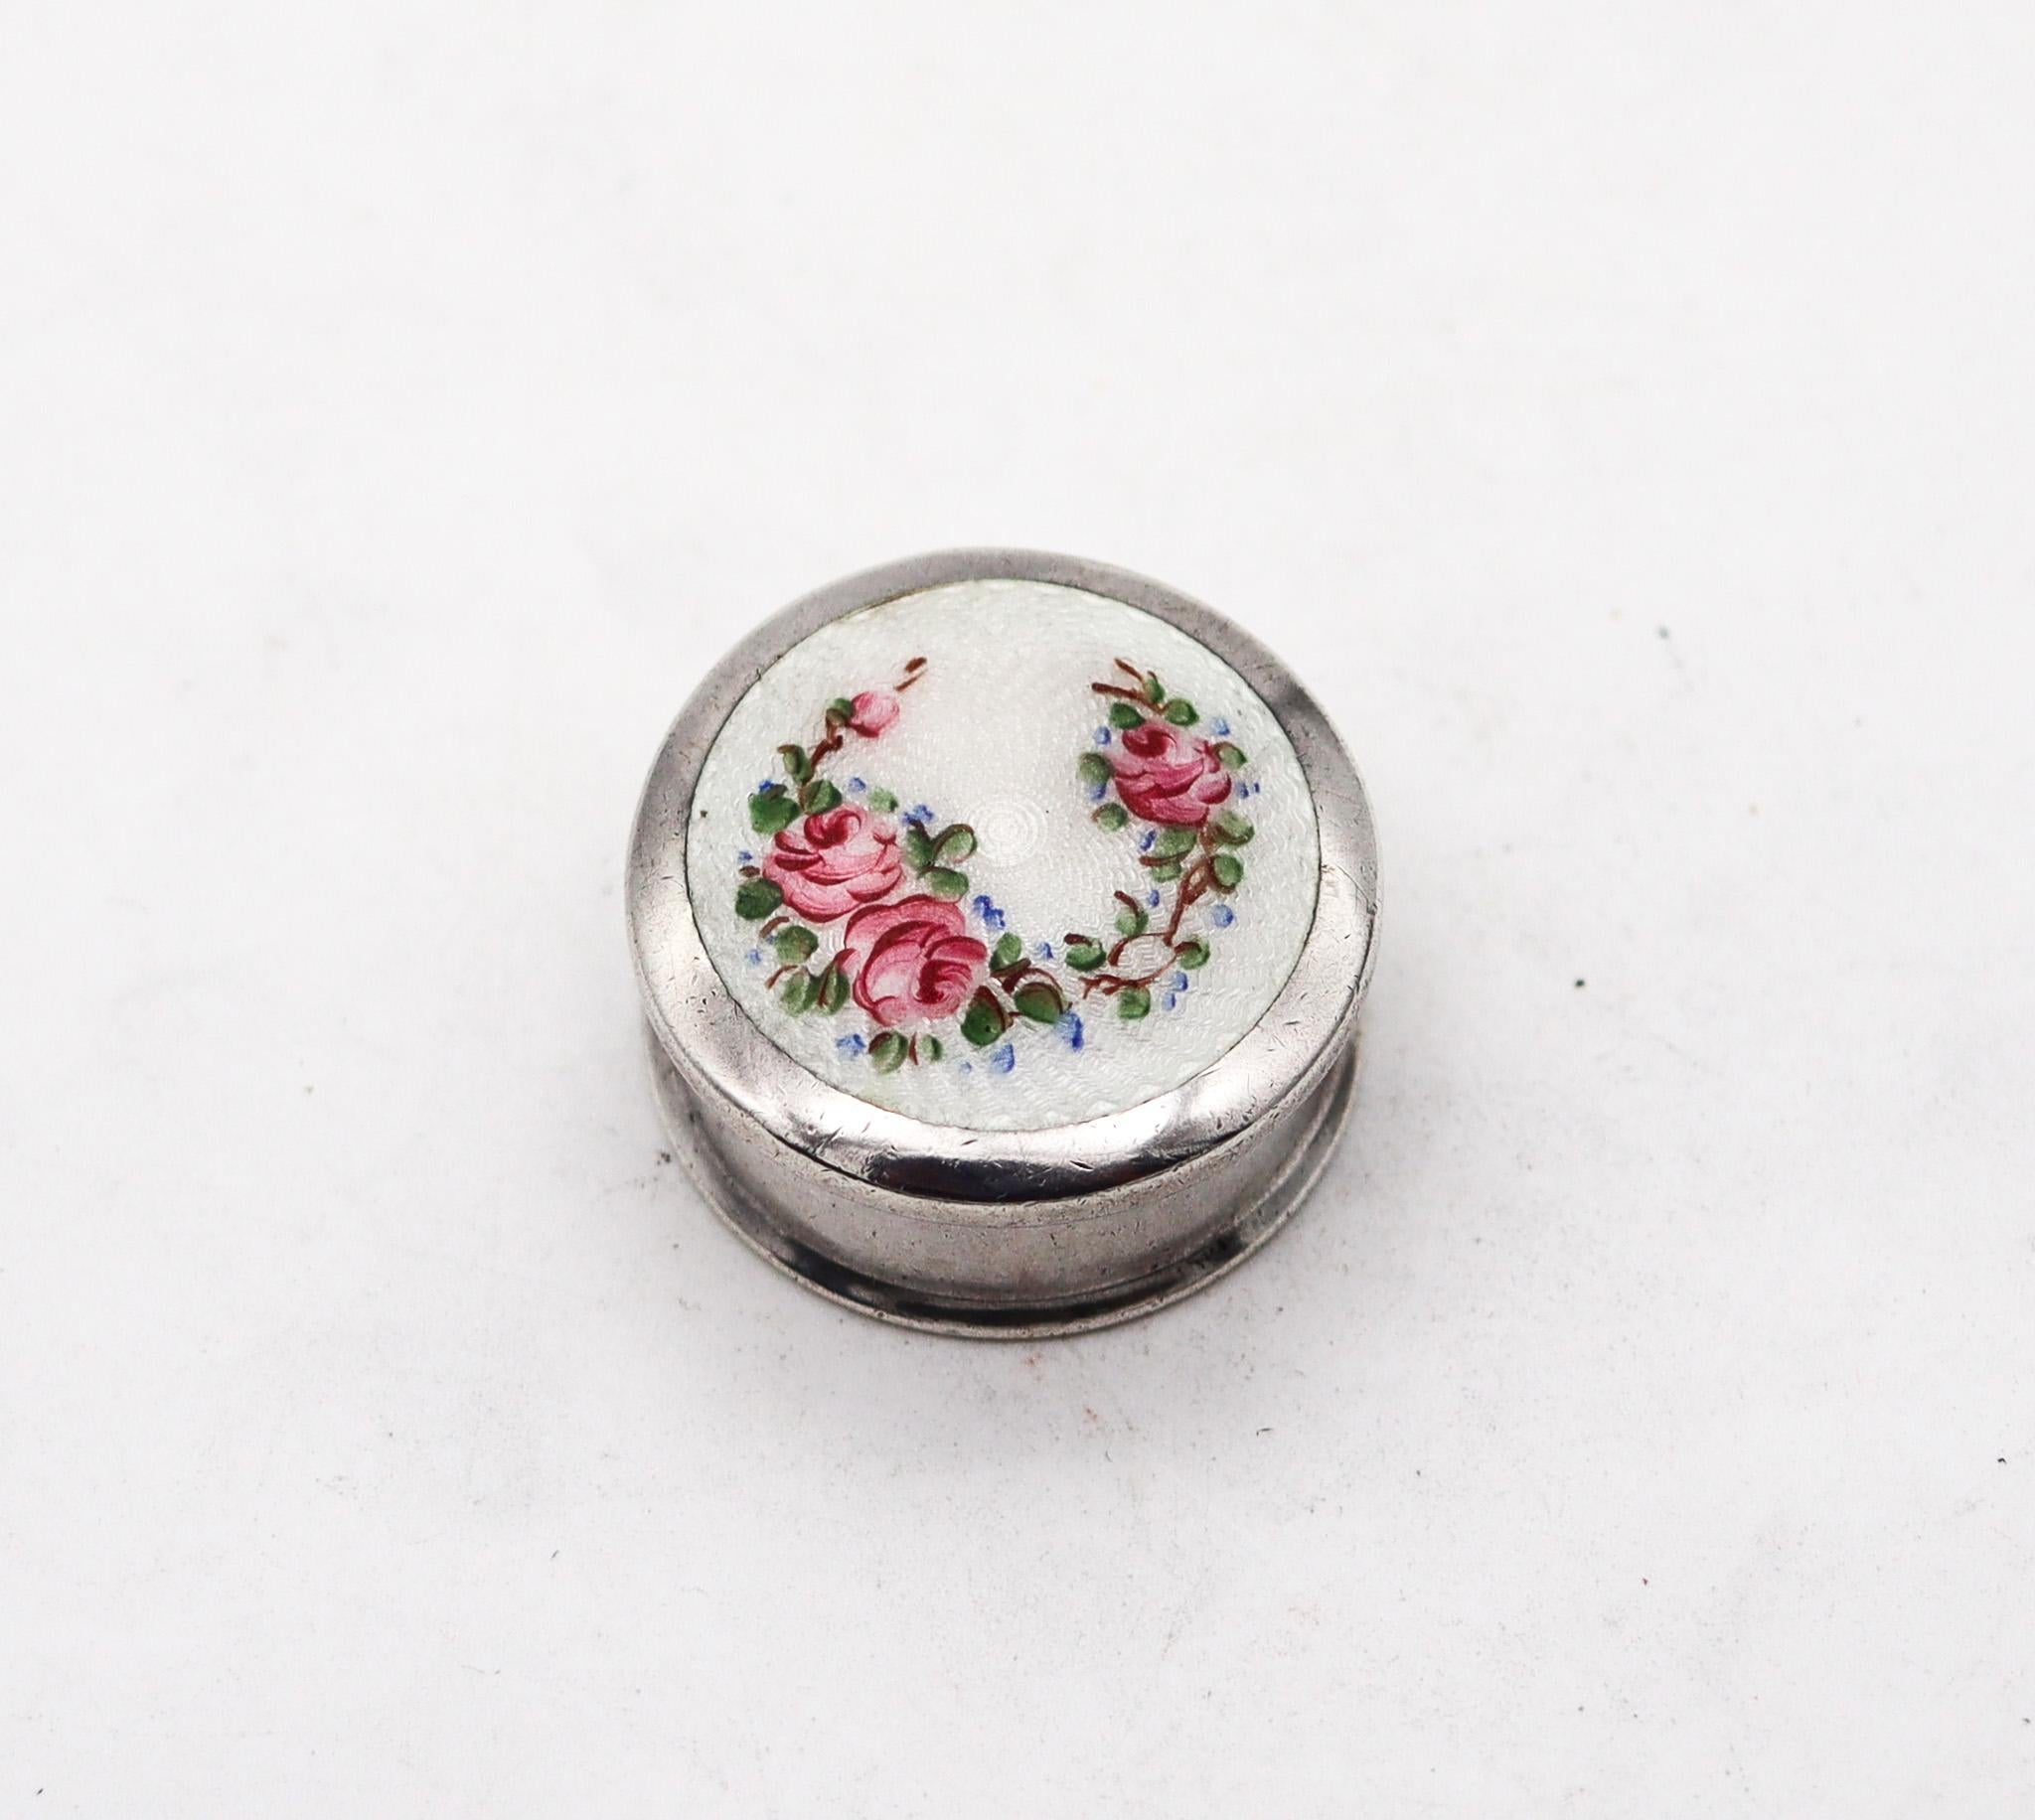 An art deco guilloche enamel pill box made by Wells & Company.

Beautiful enamel round pill box, created during the art deco period, back in the 1930. This beautiful antique piece was carefully crafted at the workshops of the Wells Company in solid